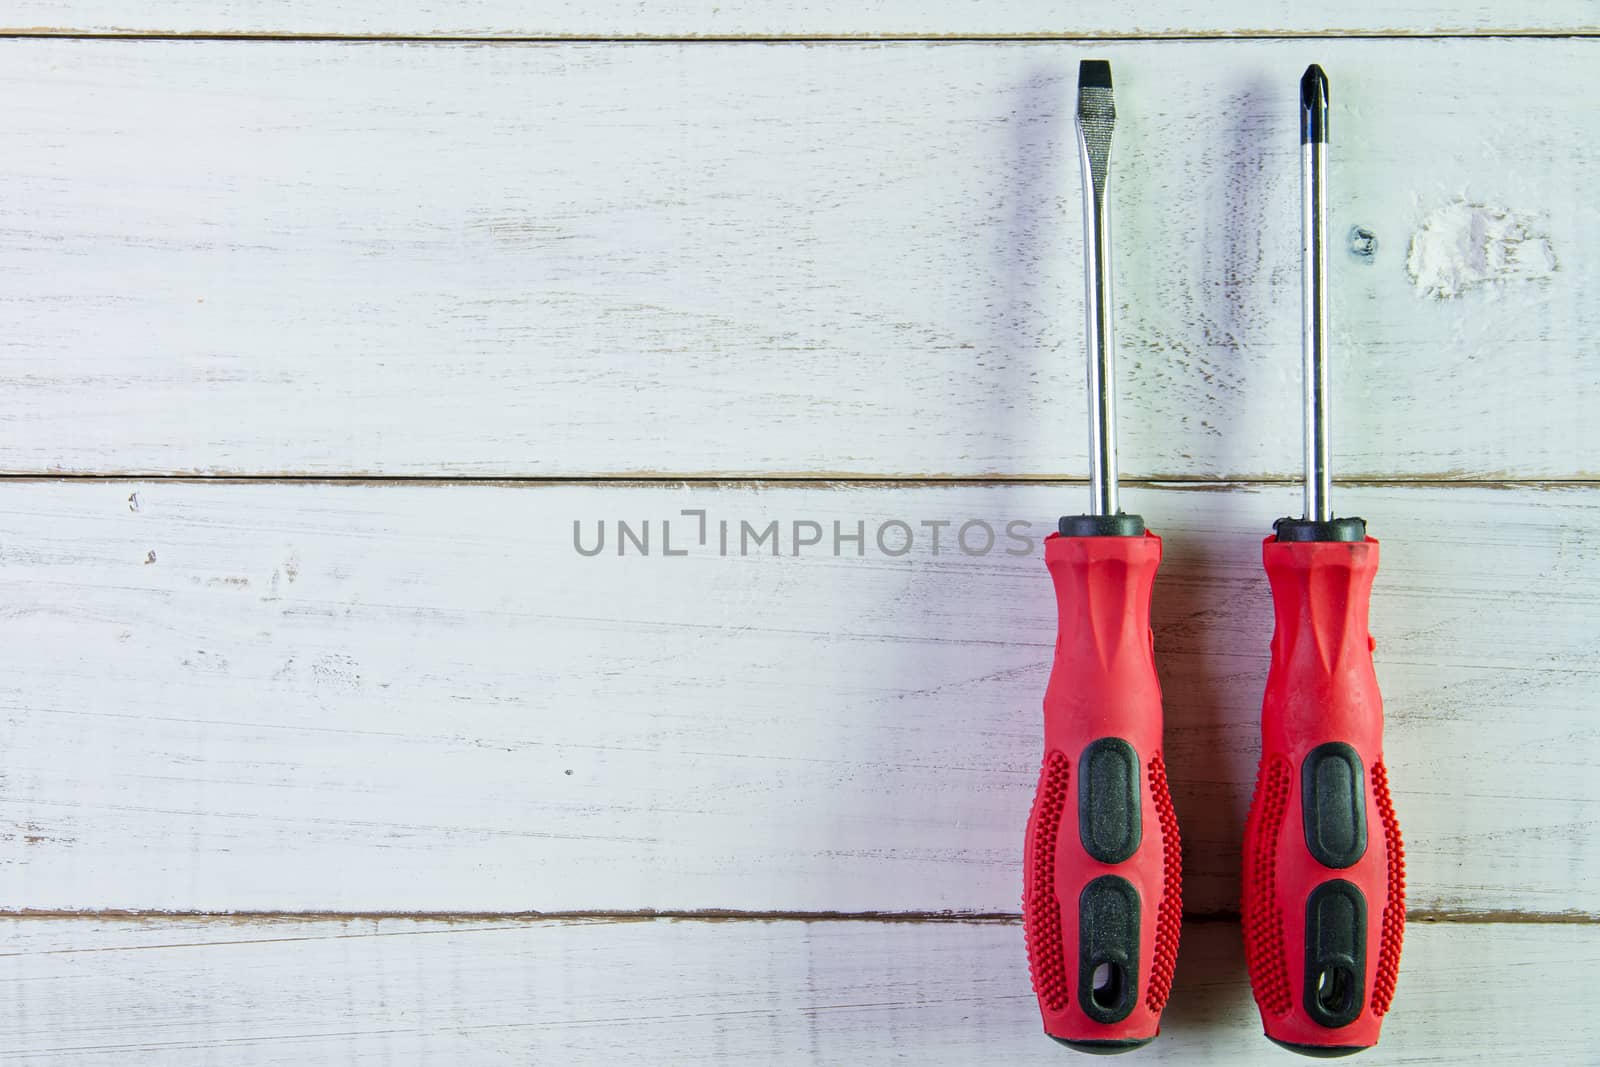 Two screwdrivers with the red handle on the white wooden background